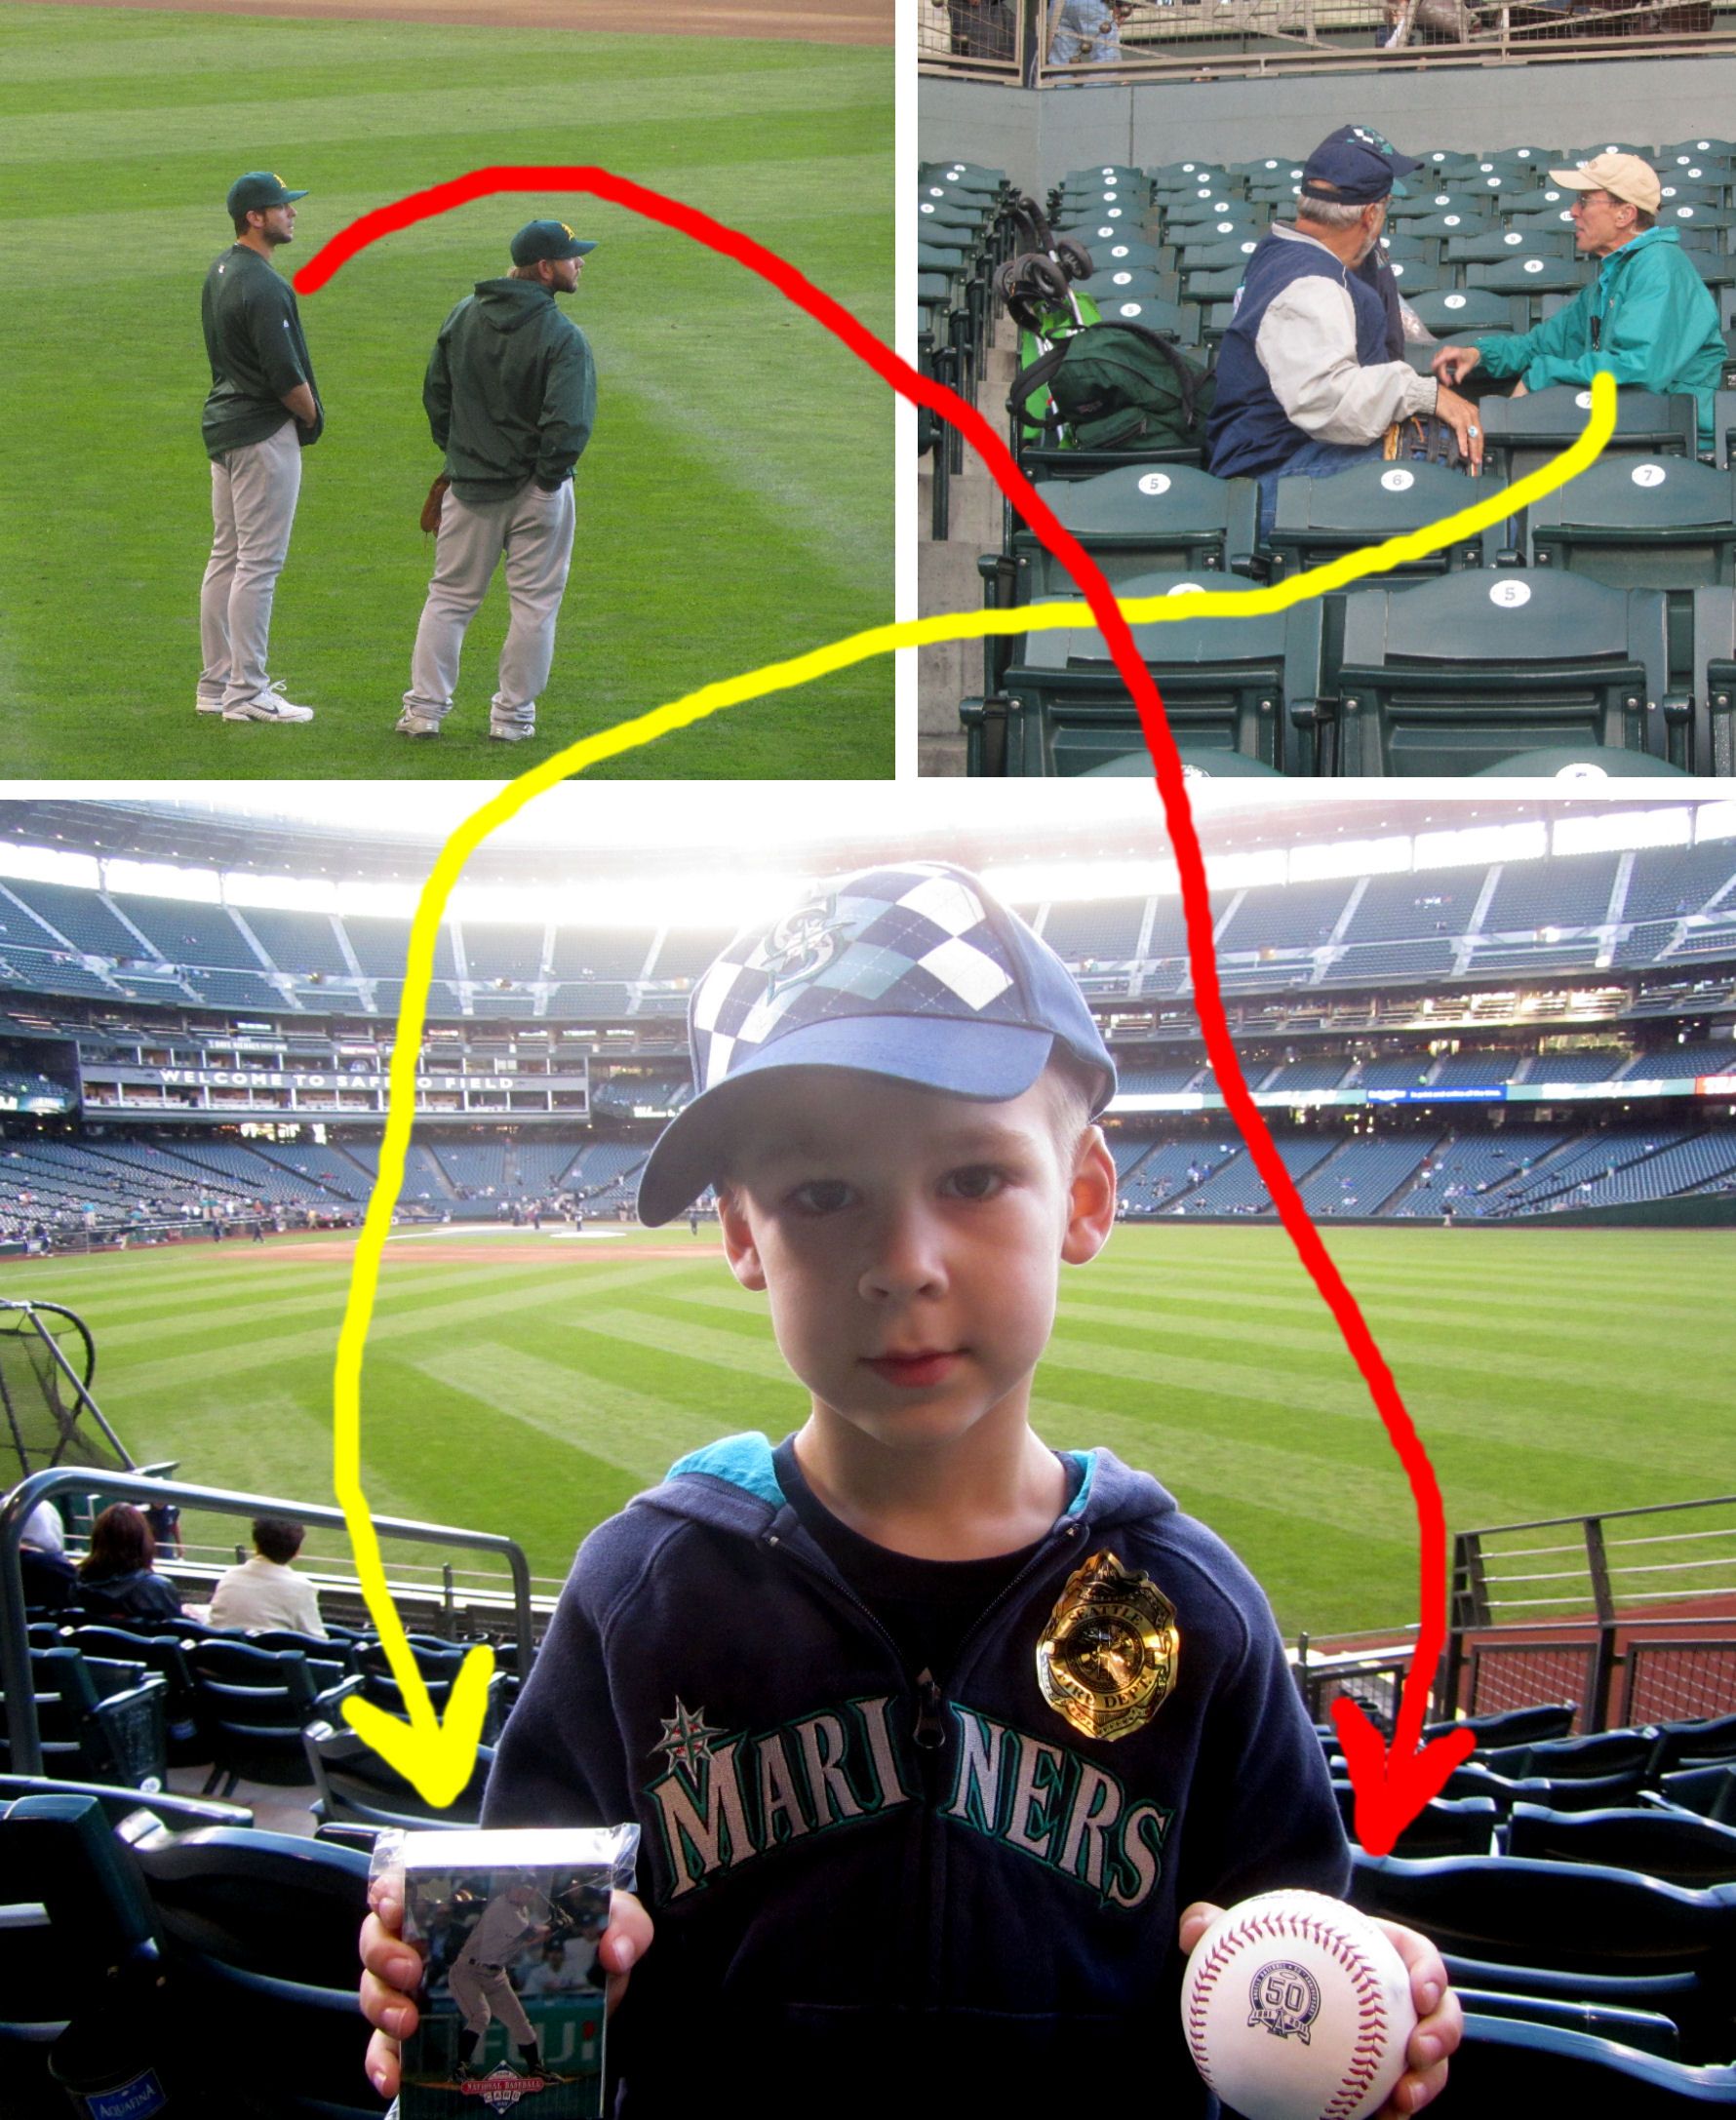 More Fun At Safeco Field (9/27/2011) « Cook & Sons' Baseball ...